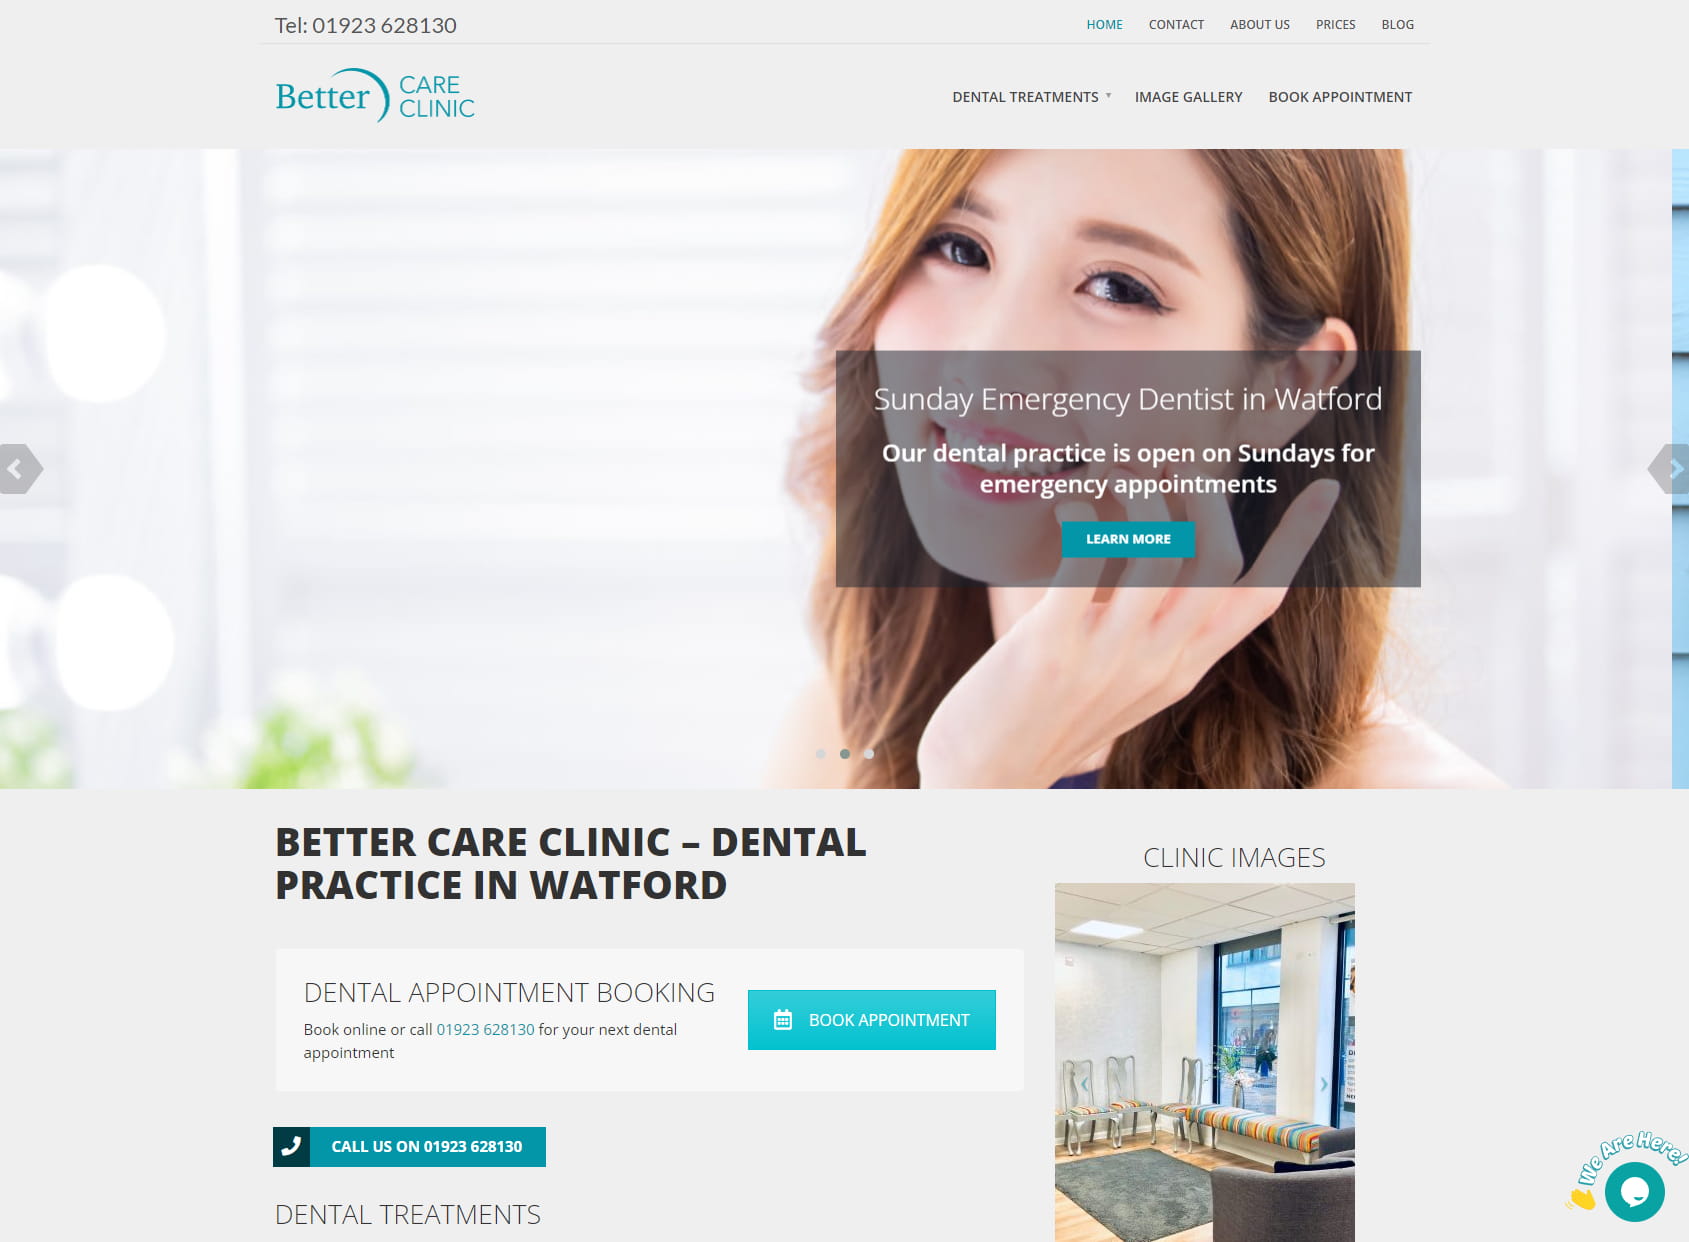 Better Care Clinic - Dental Practice